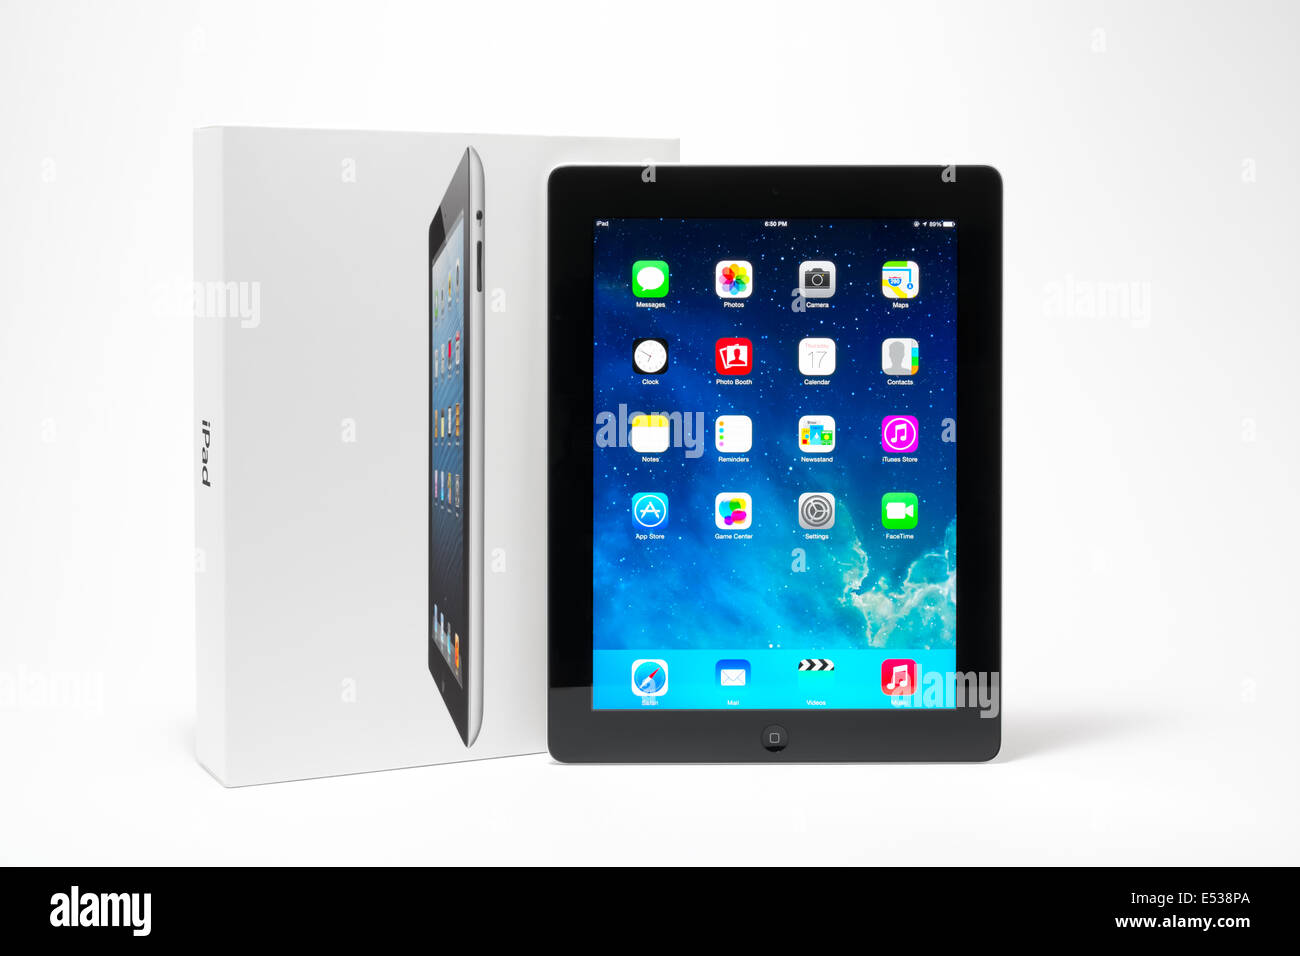 Manila,Philippines - July 17, 2014: Apple Ipad 4th generation (Retina Display) with with iOS 7 home screen. iOS 7 new operation Stock Photo